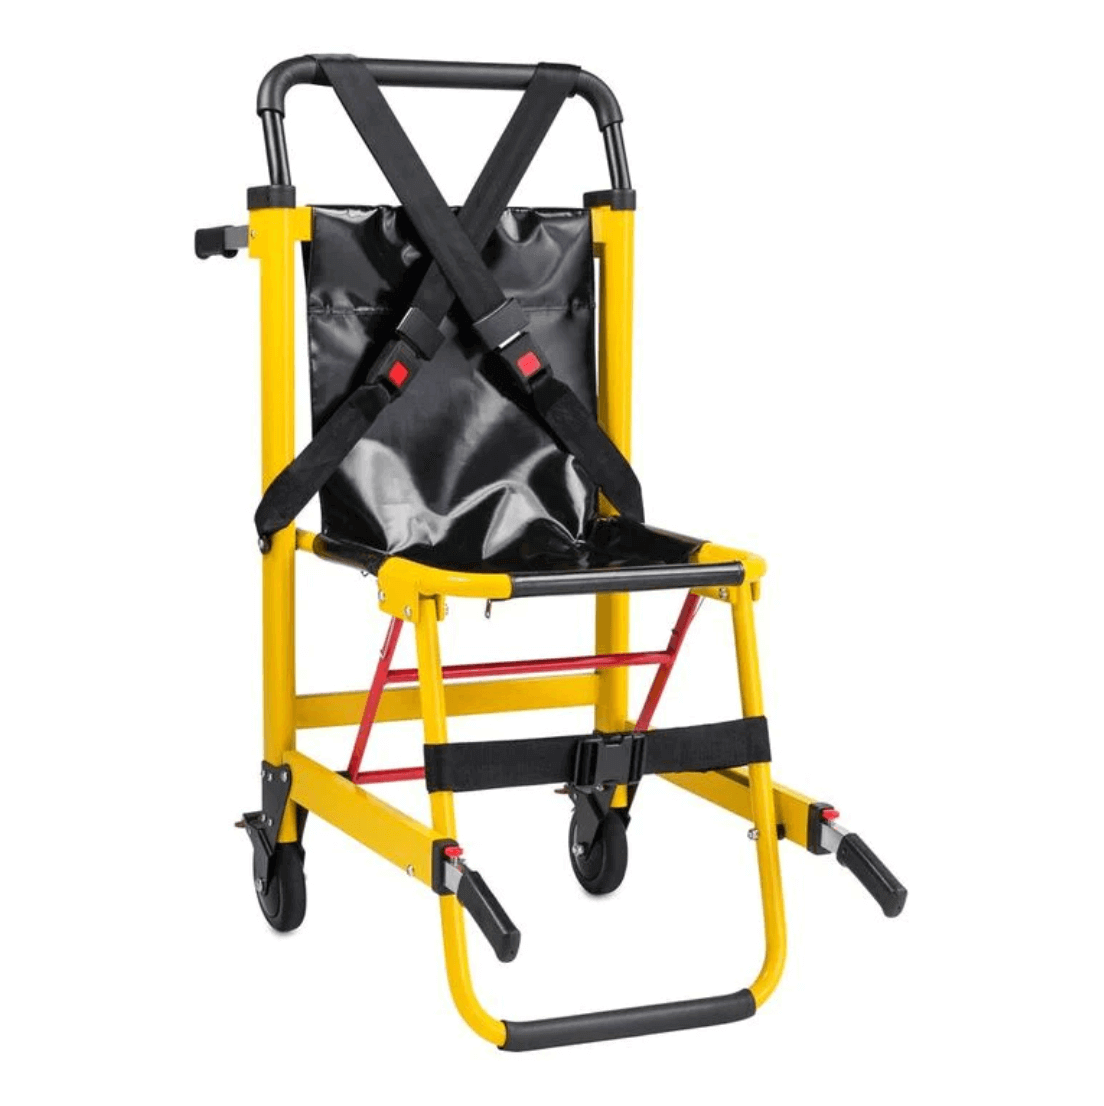 LINE2design 2-Wheel Deluxe Evacuation Folding Stair Chair - Ideal for EMS/Ambulance Transport